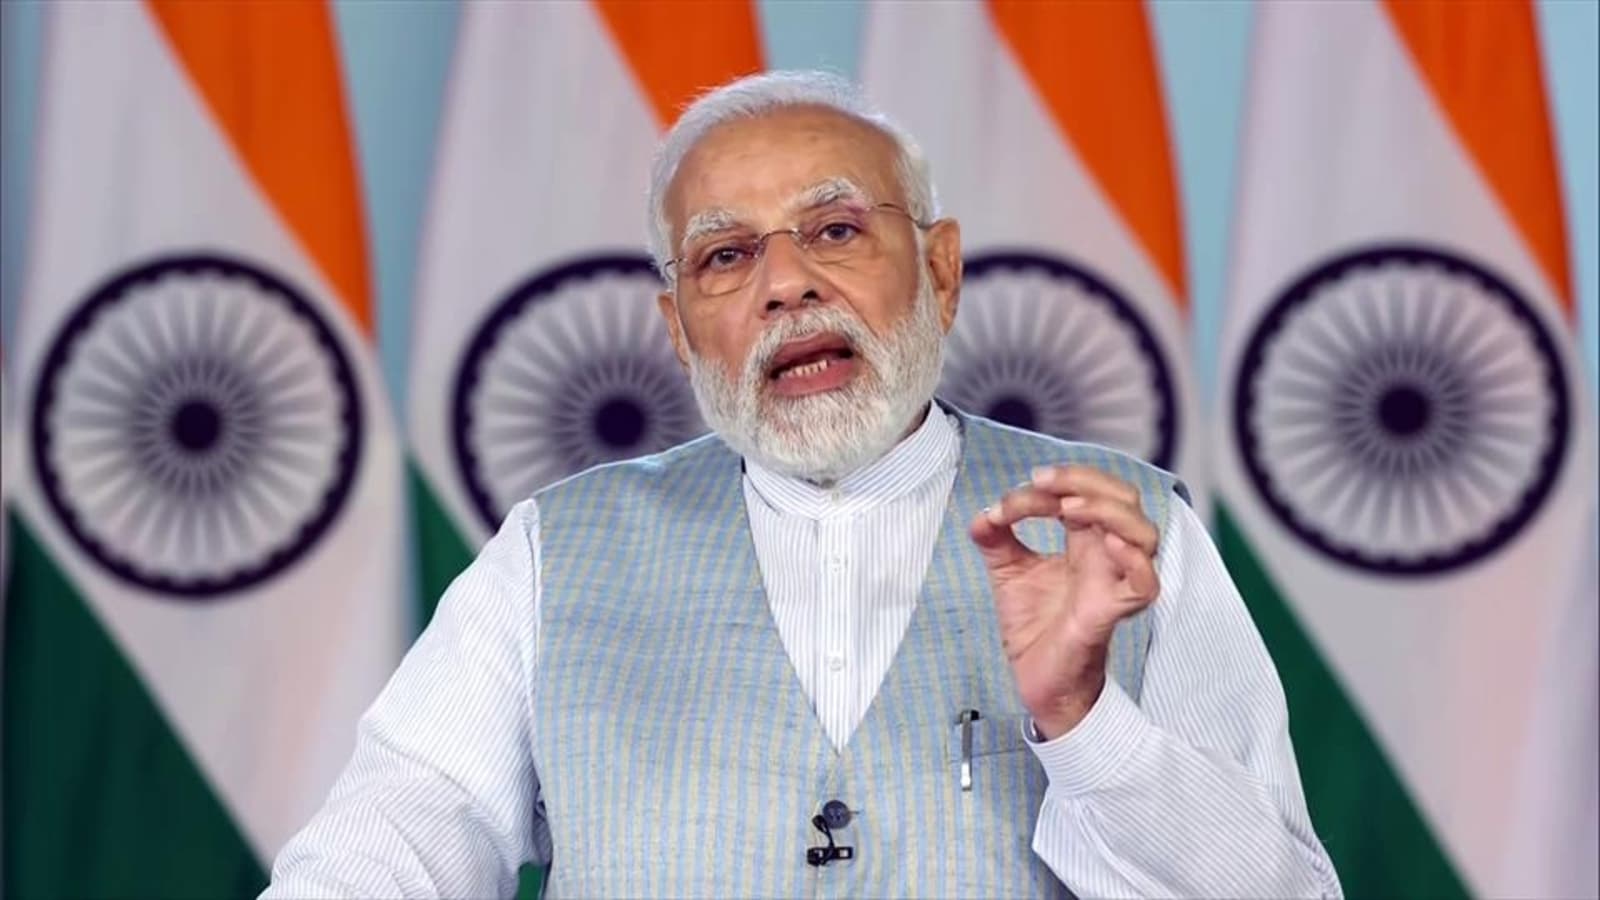 PM Modi to share his thoughts in 93rd episode of Mann Ki Baat on Sunday, September 25